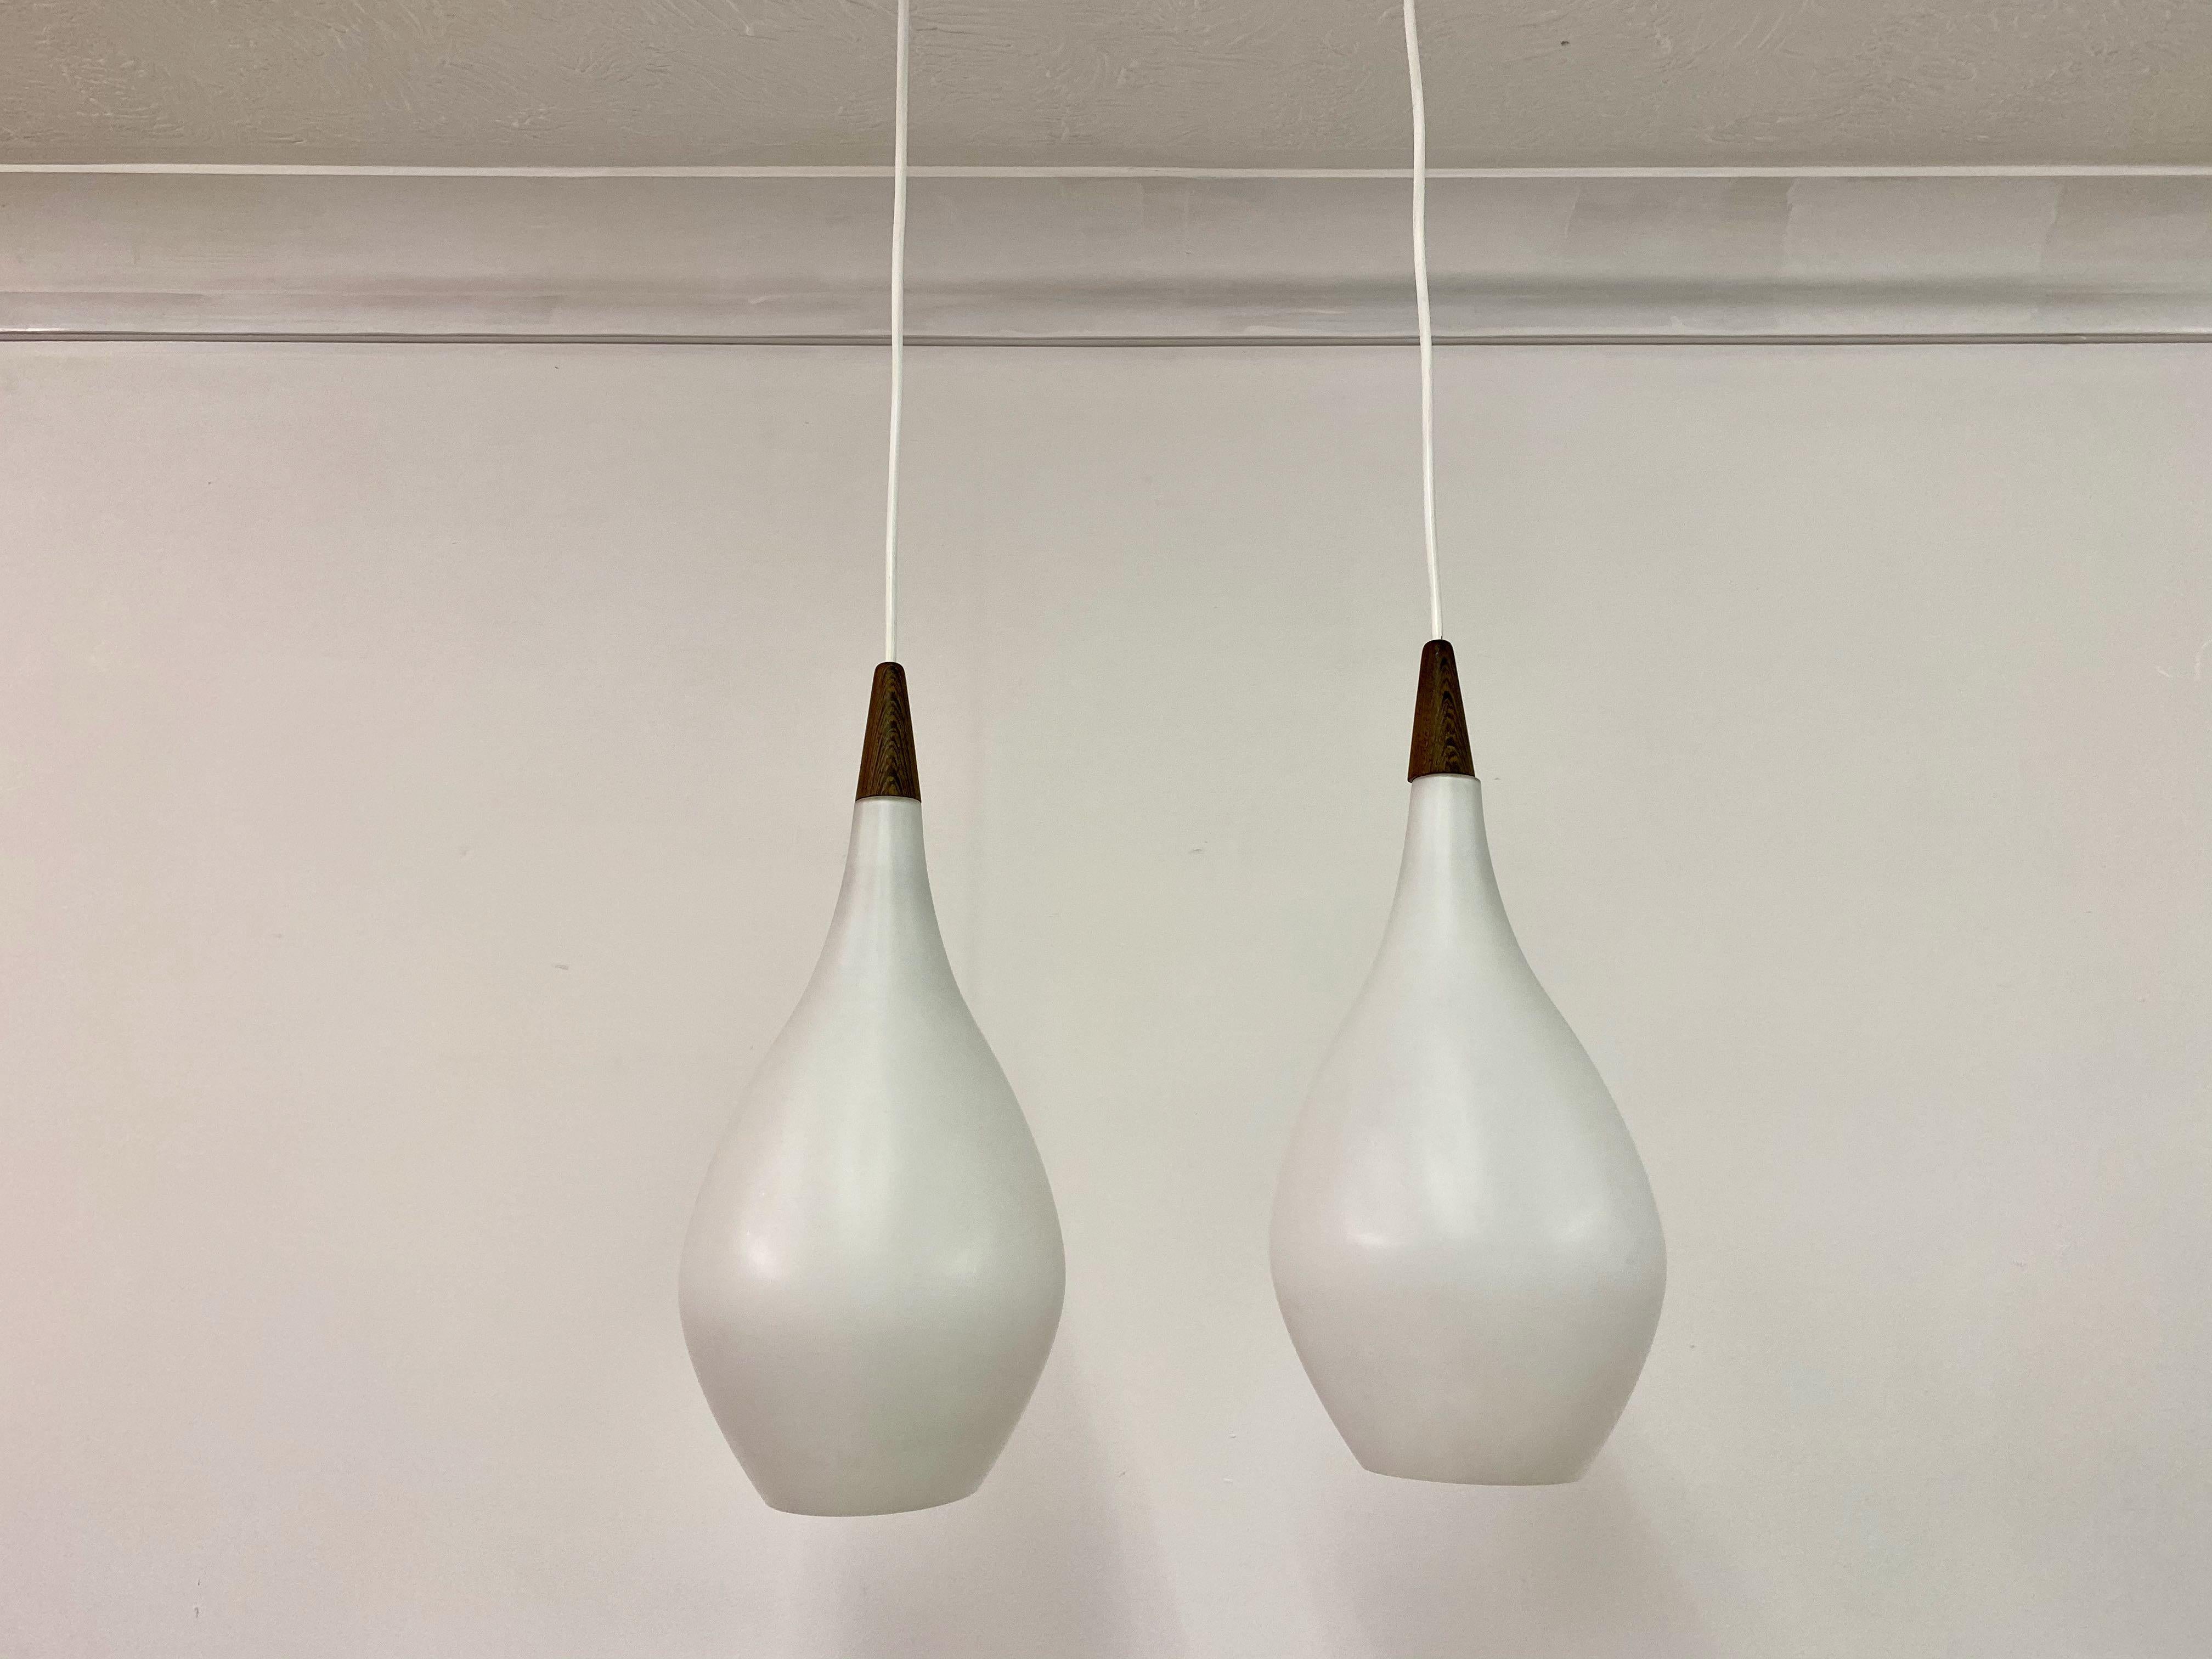 Pair of teardrop shaped pendants

Opaline glass

Wenge top

Probably by Holmegaard

New electrical components

Some small chips to bottom

Measurements do not include the cord

One lamp stamped made in Denmark to cork